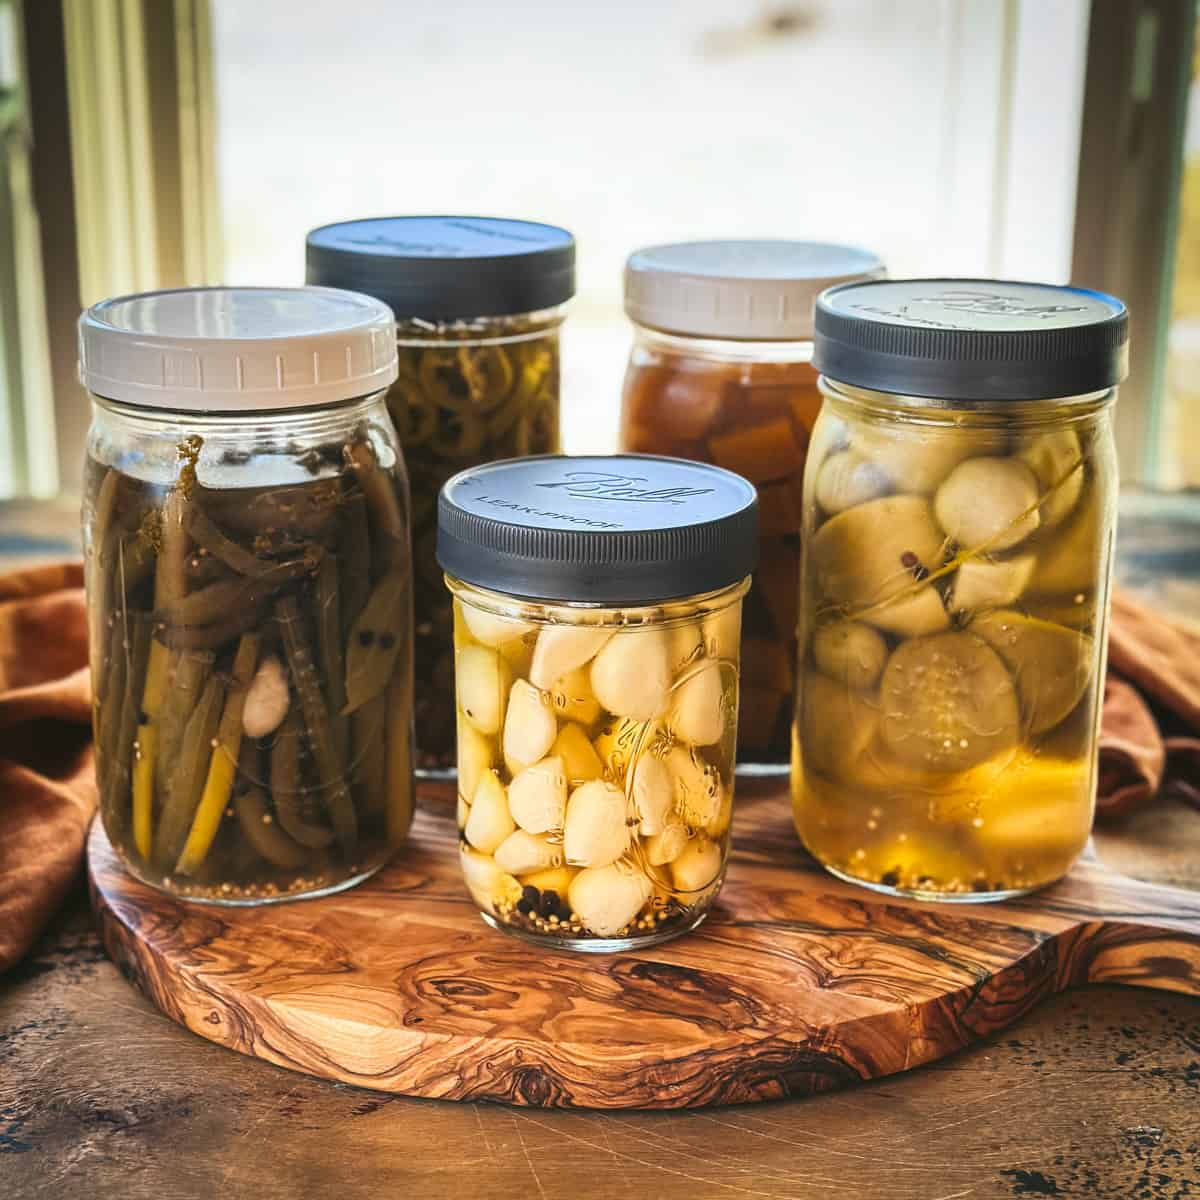 Several jars of different types of quick refrigerator pickles on a wooden table